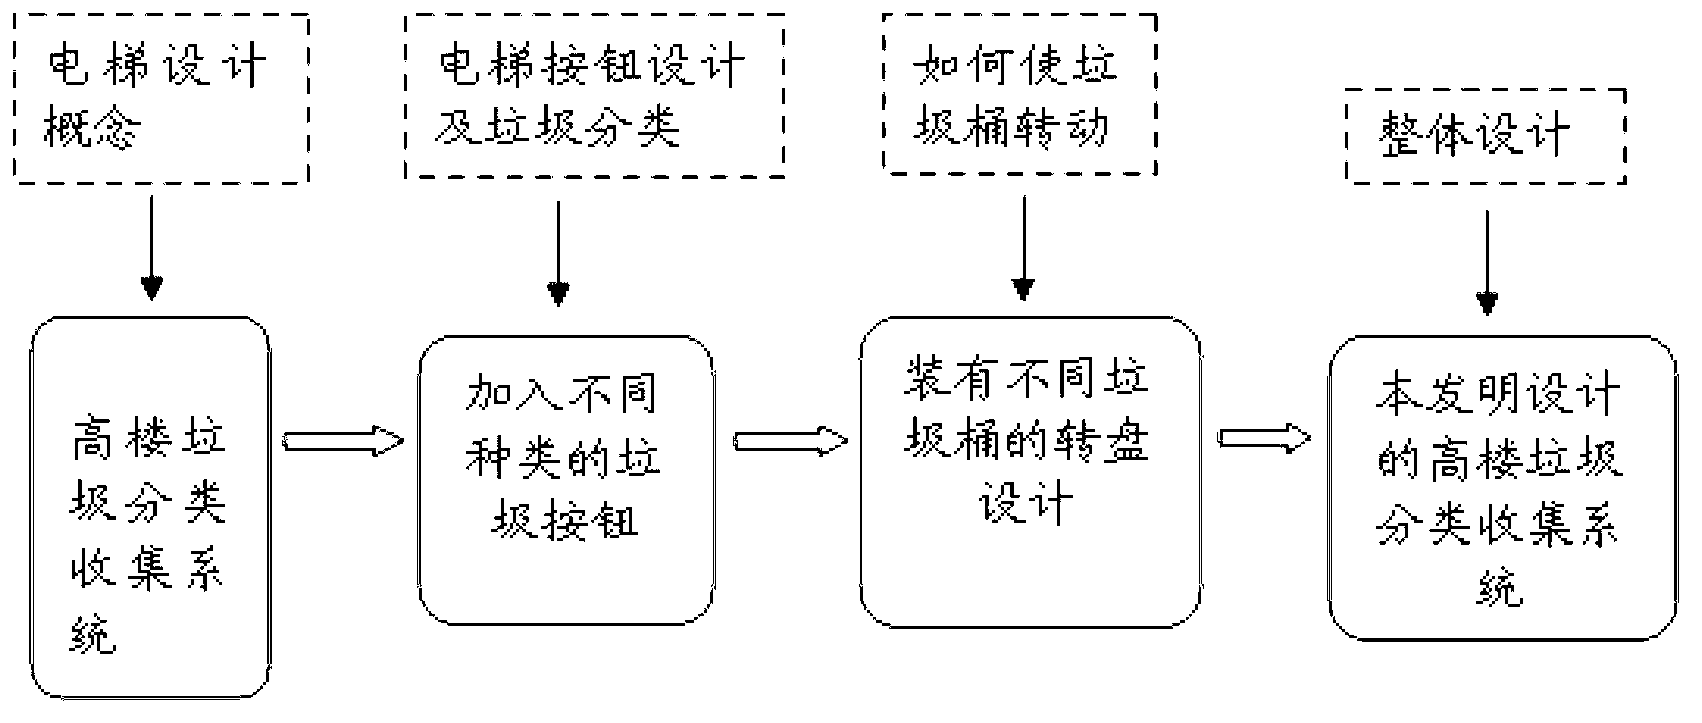 Garbage classification and collection system for high-rise building